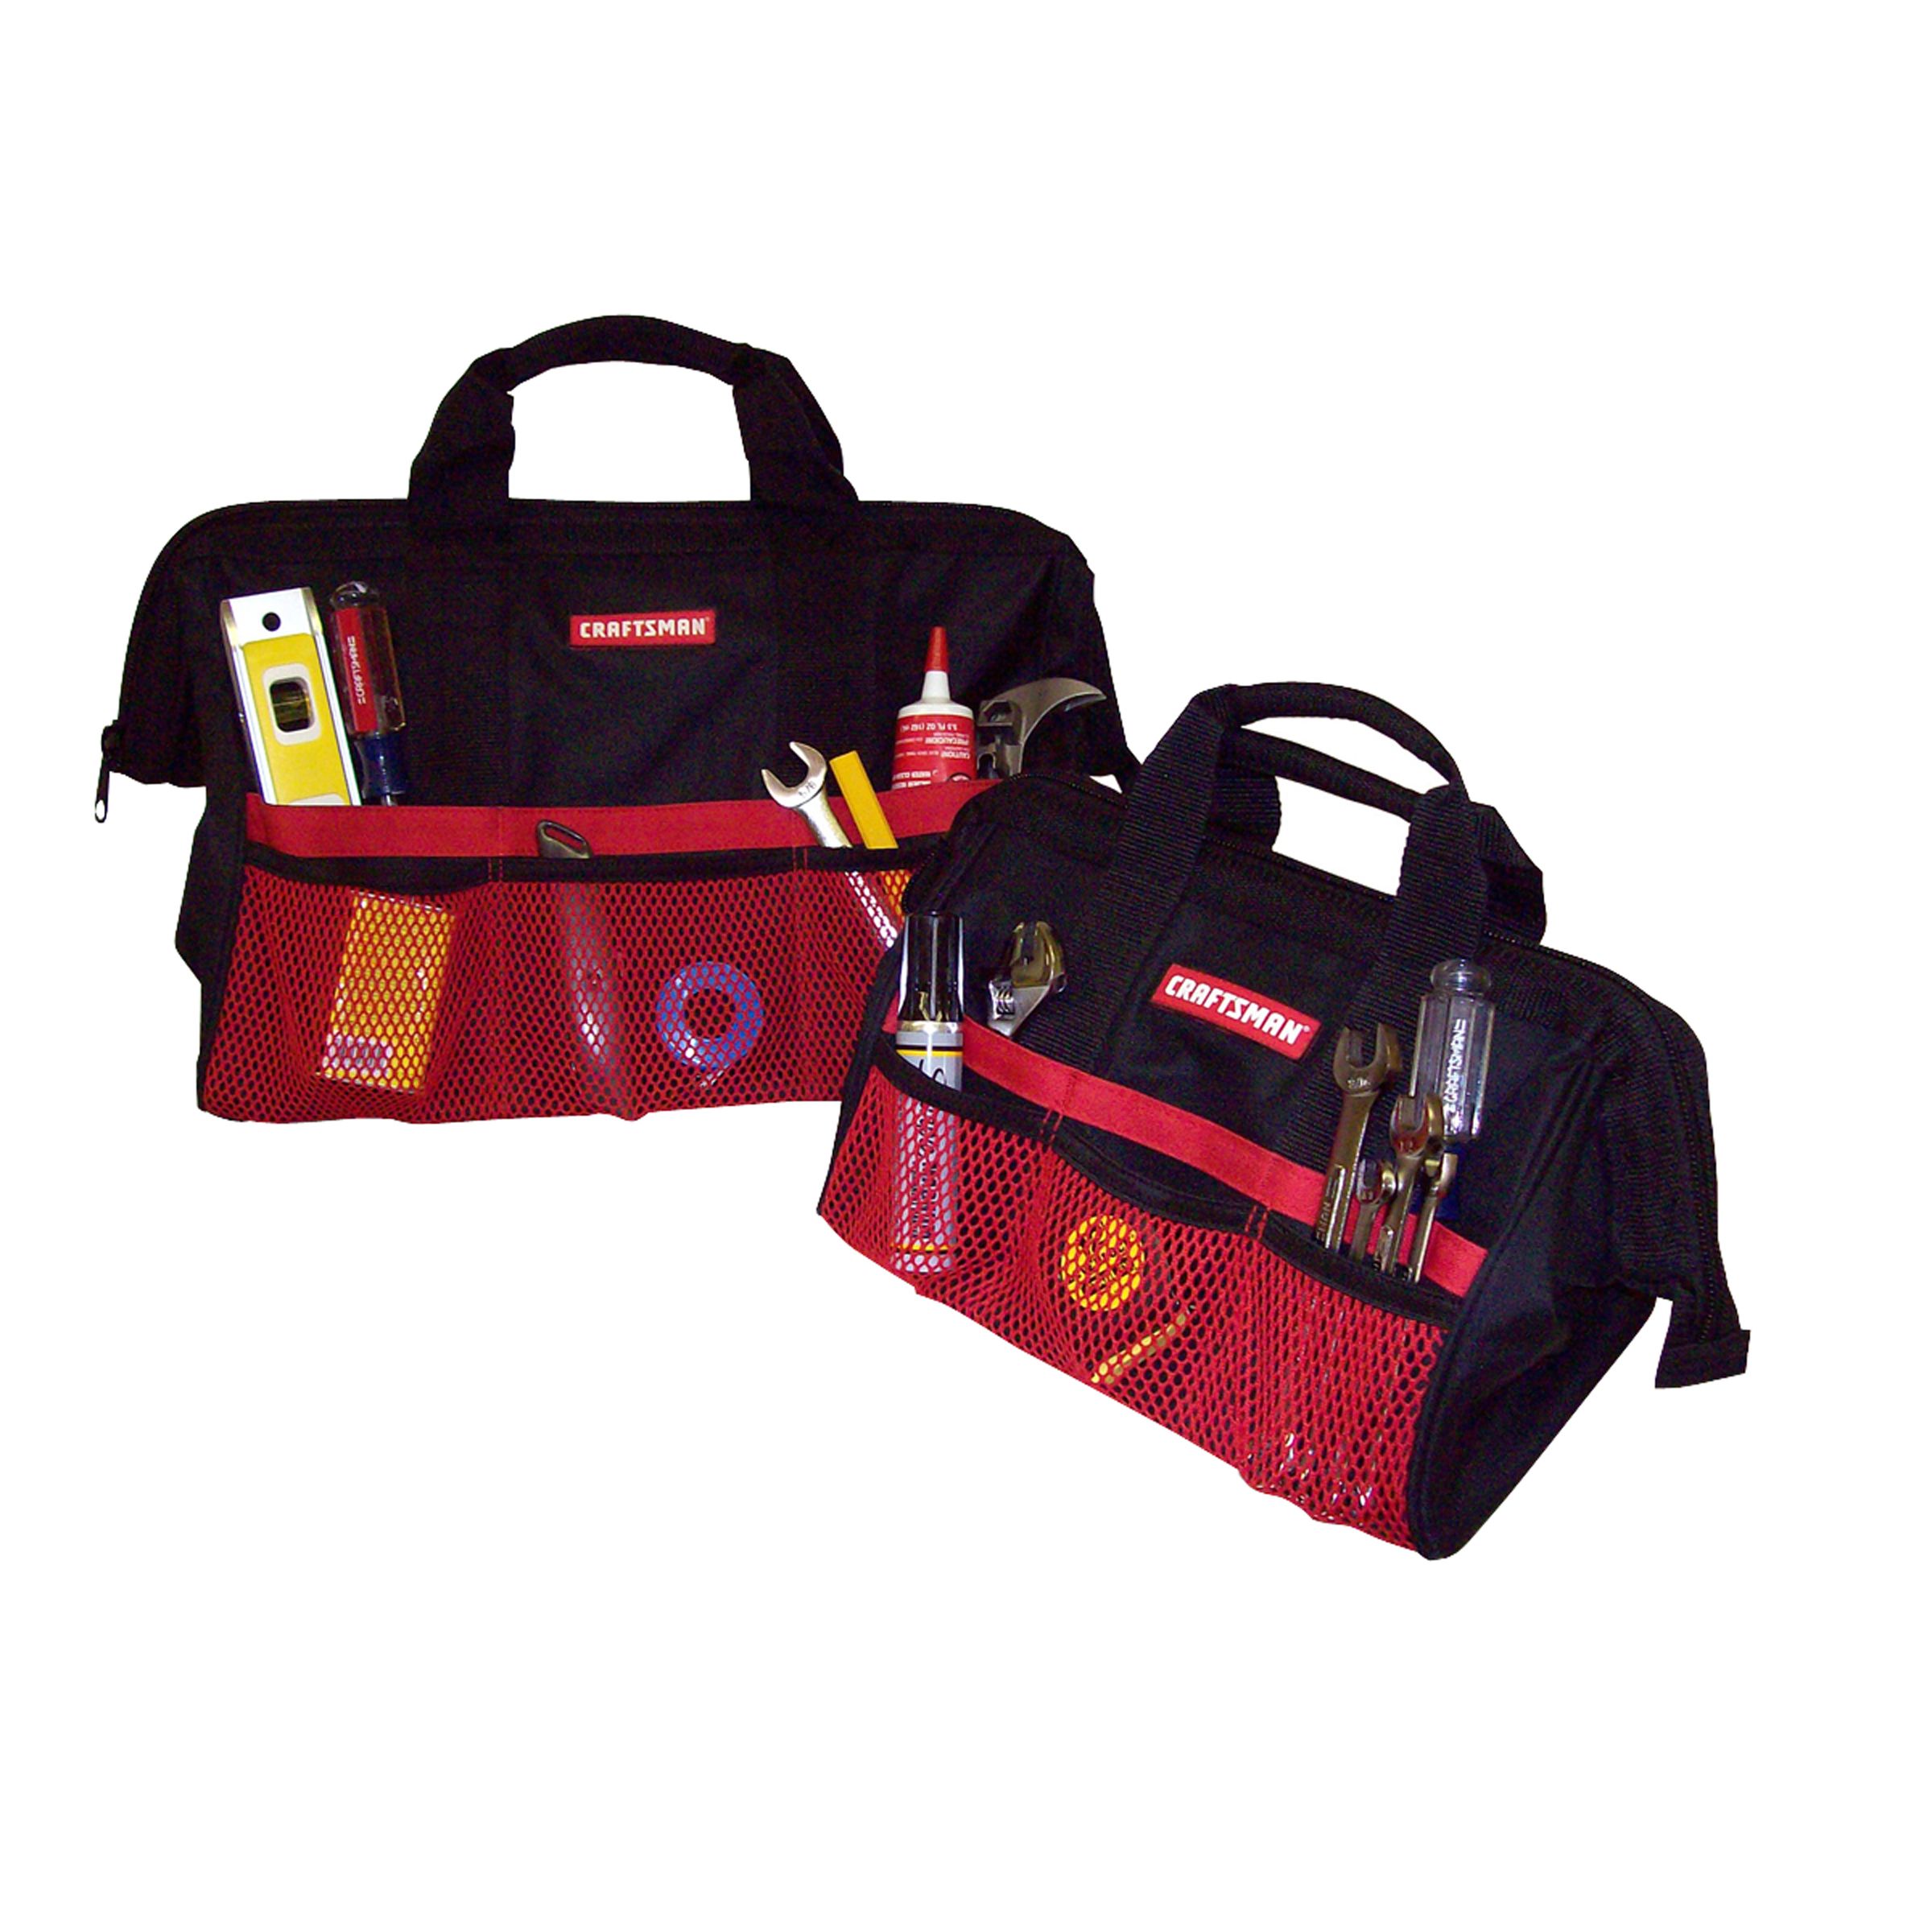 Craftsman 13″ and 18″ Tool Bag Combo Only $9.99!